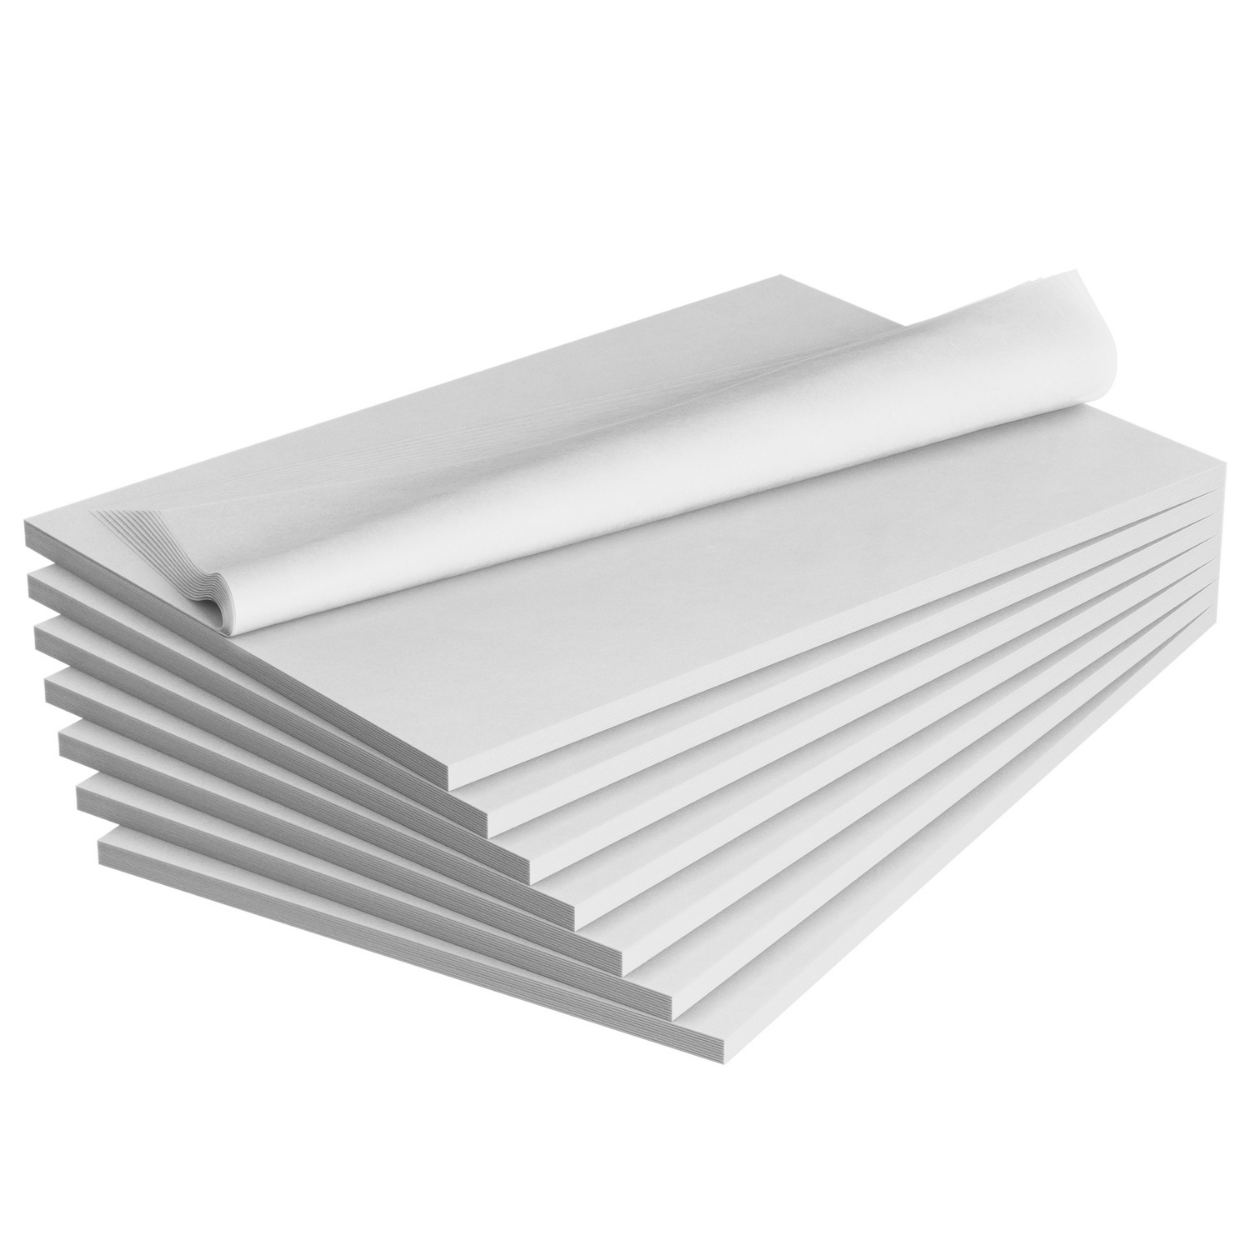 20 x 30 White Quire Fold Tissue (Pack of 480 sheets)